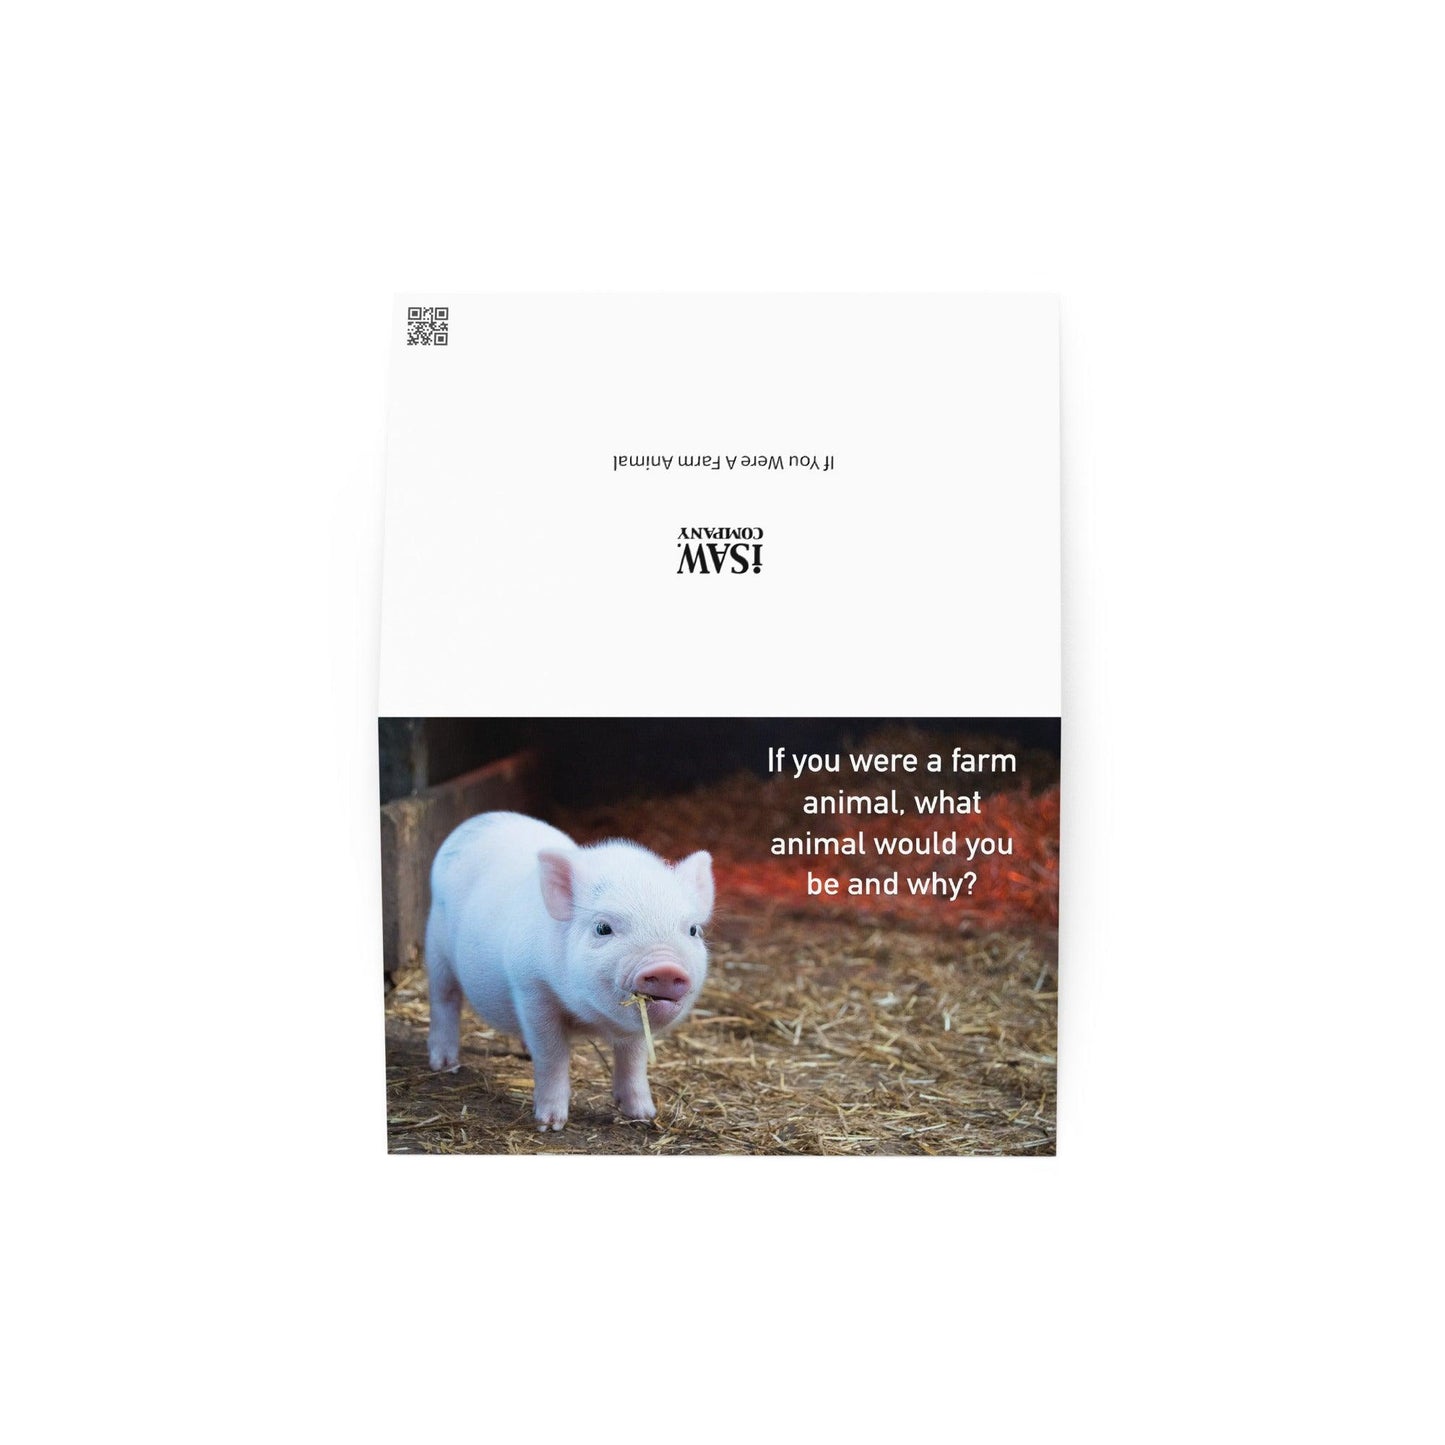 If You Were A Farm Animal - Note Card - iSAW Company